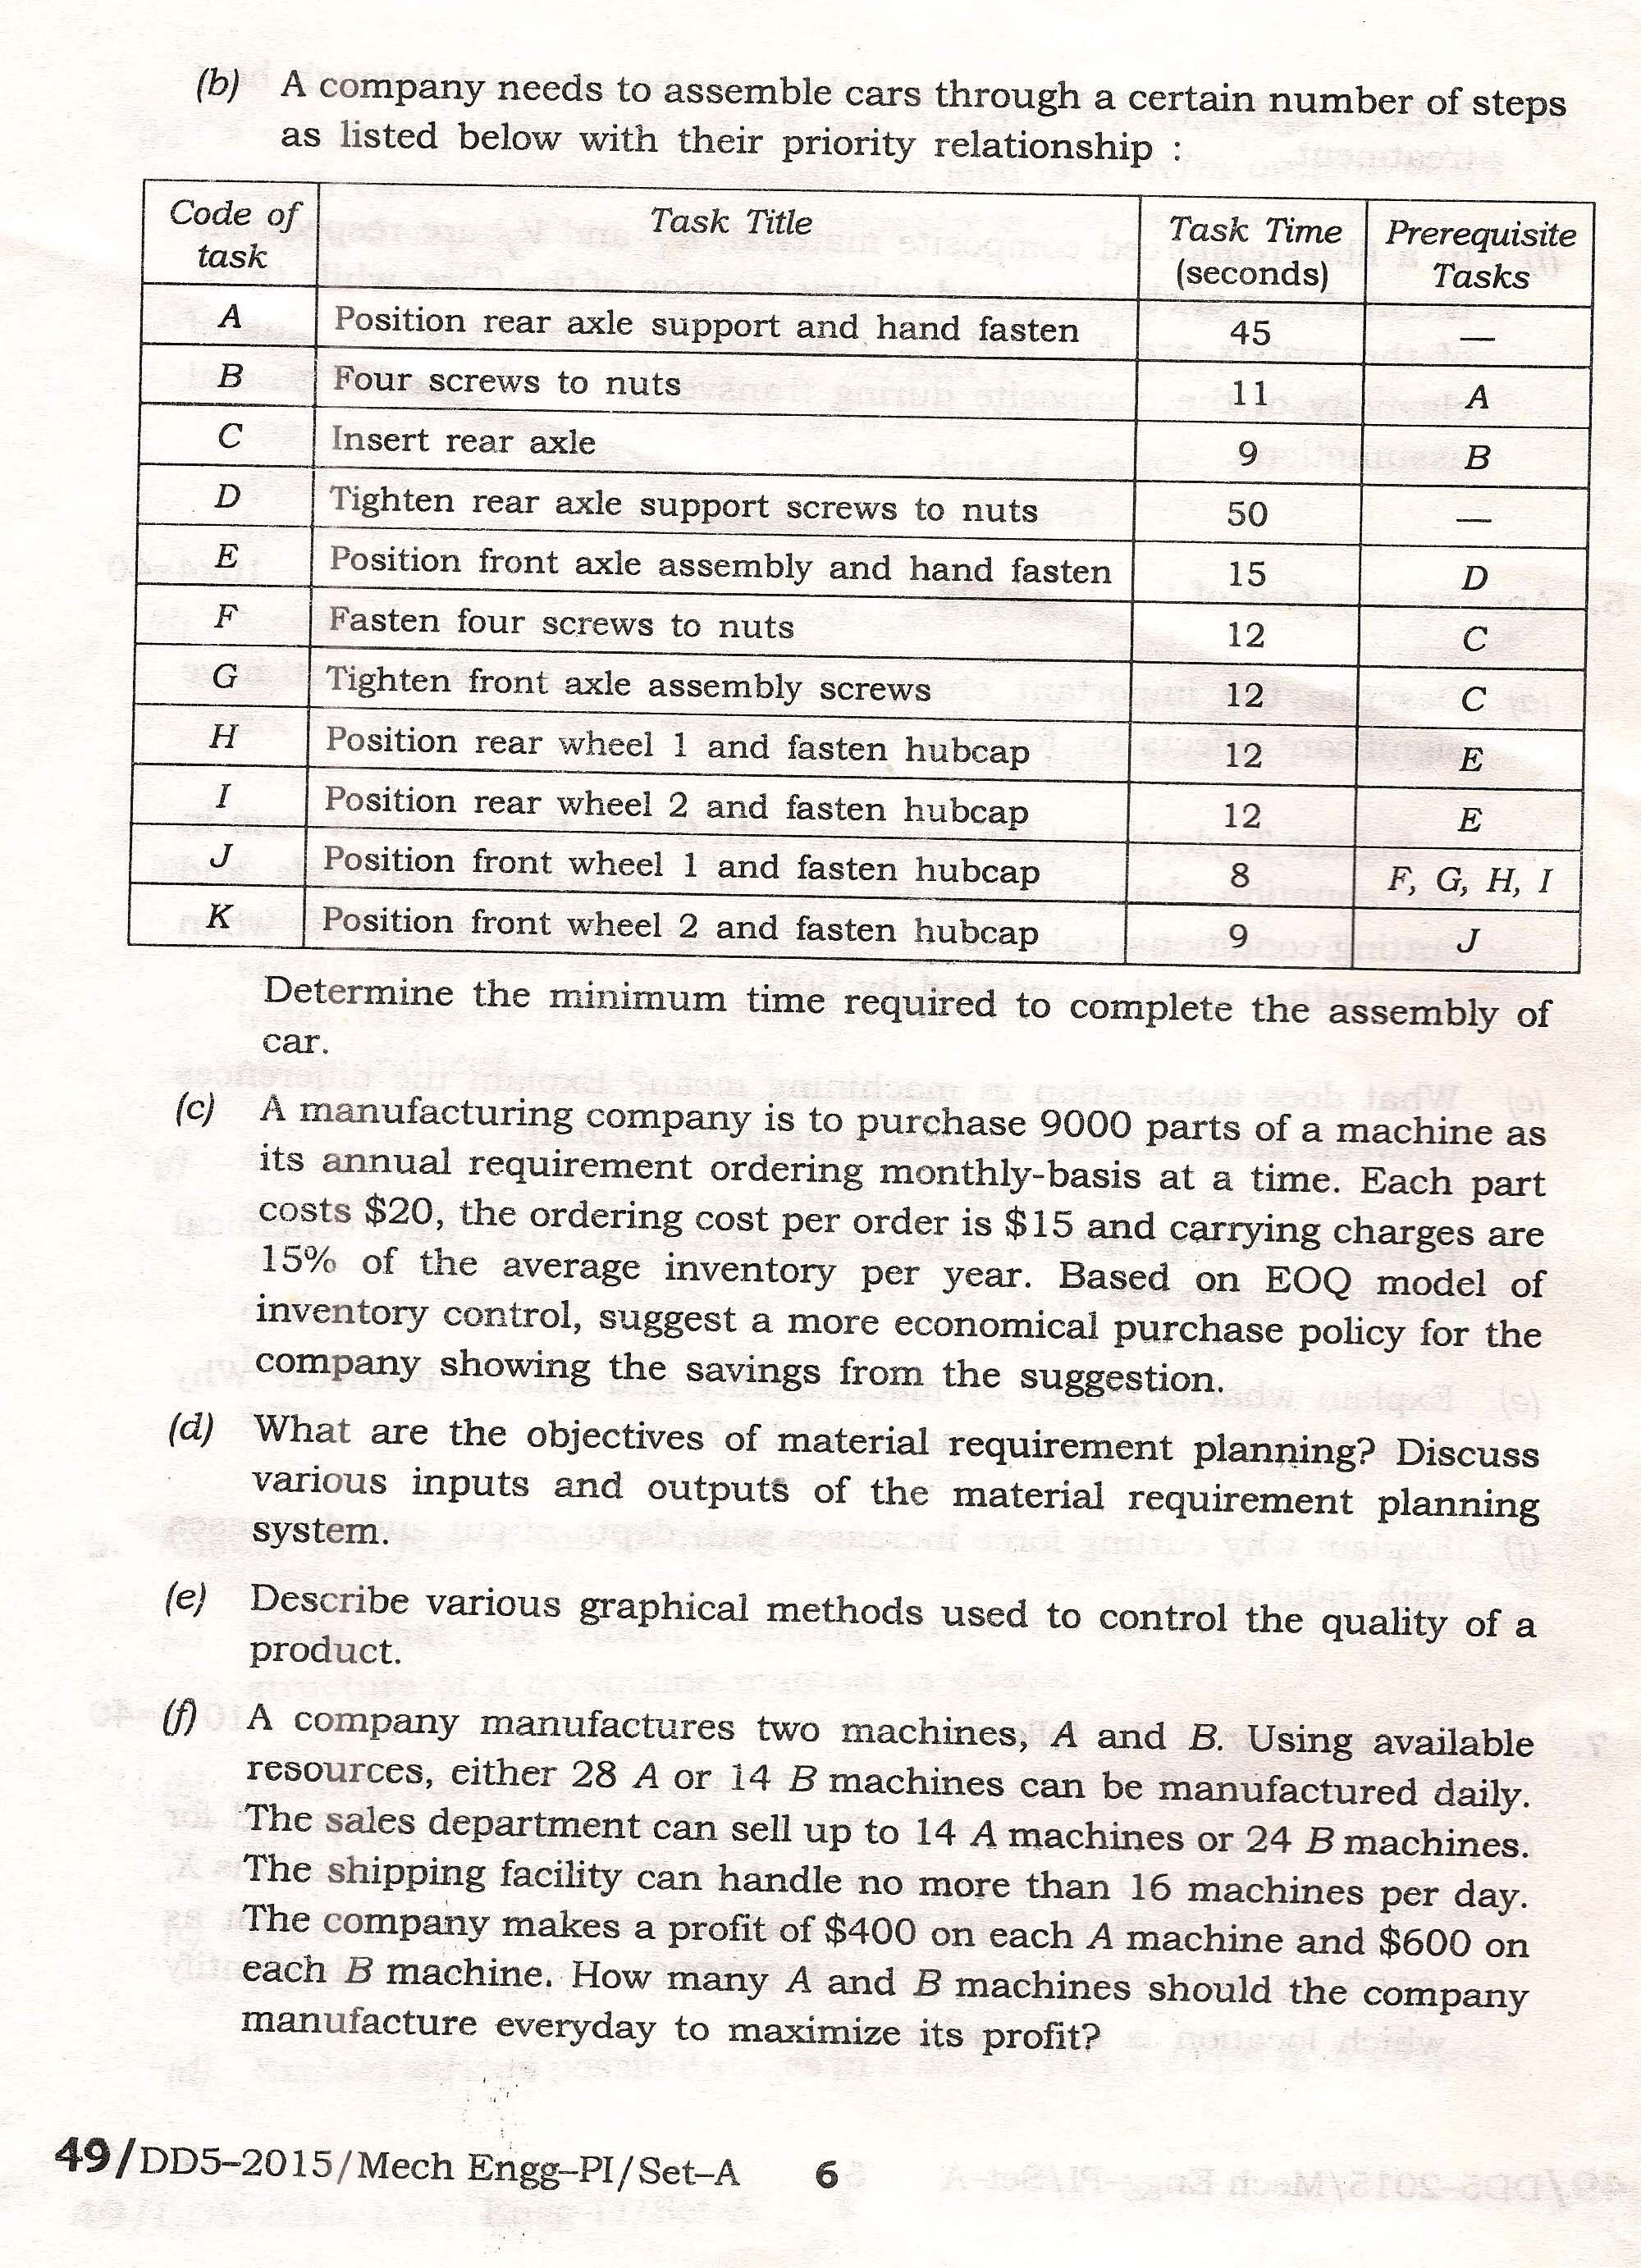 APPSC Combined Competitive Main Exam 2015 Mechanical Engineering Paper I 6